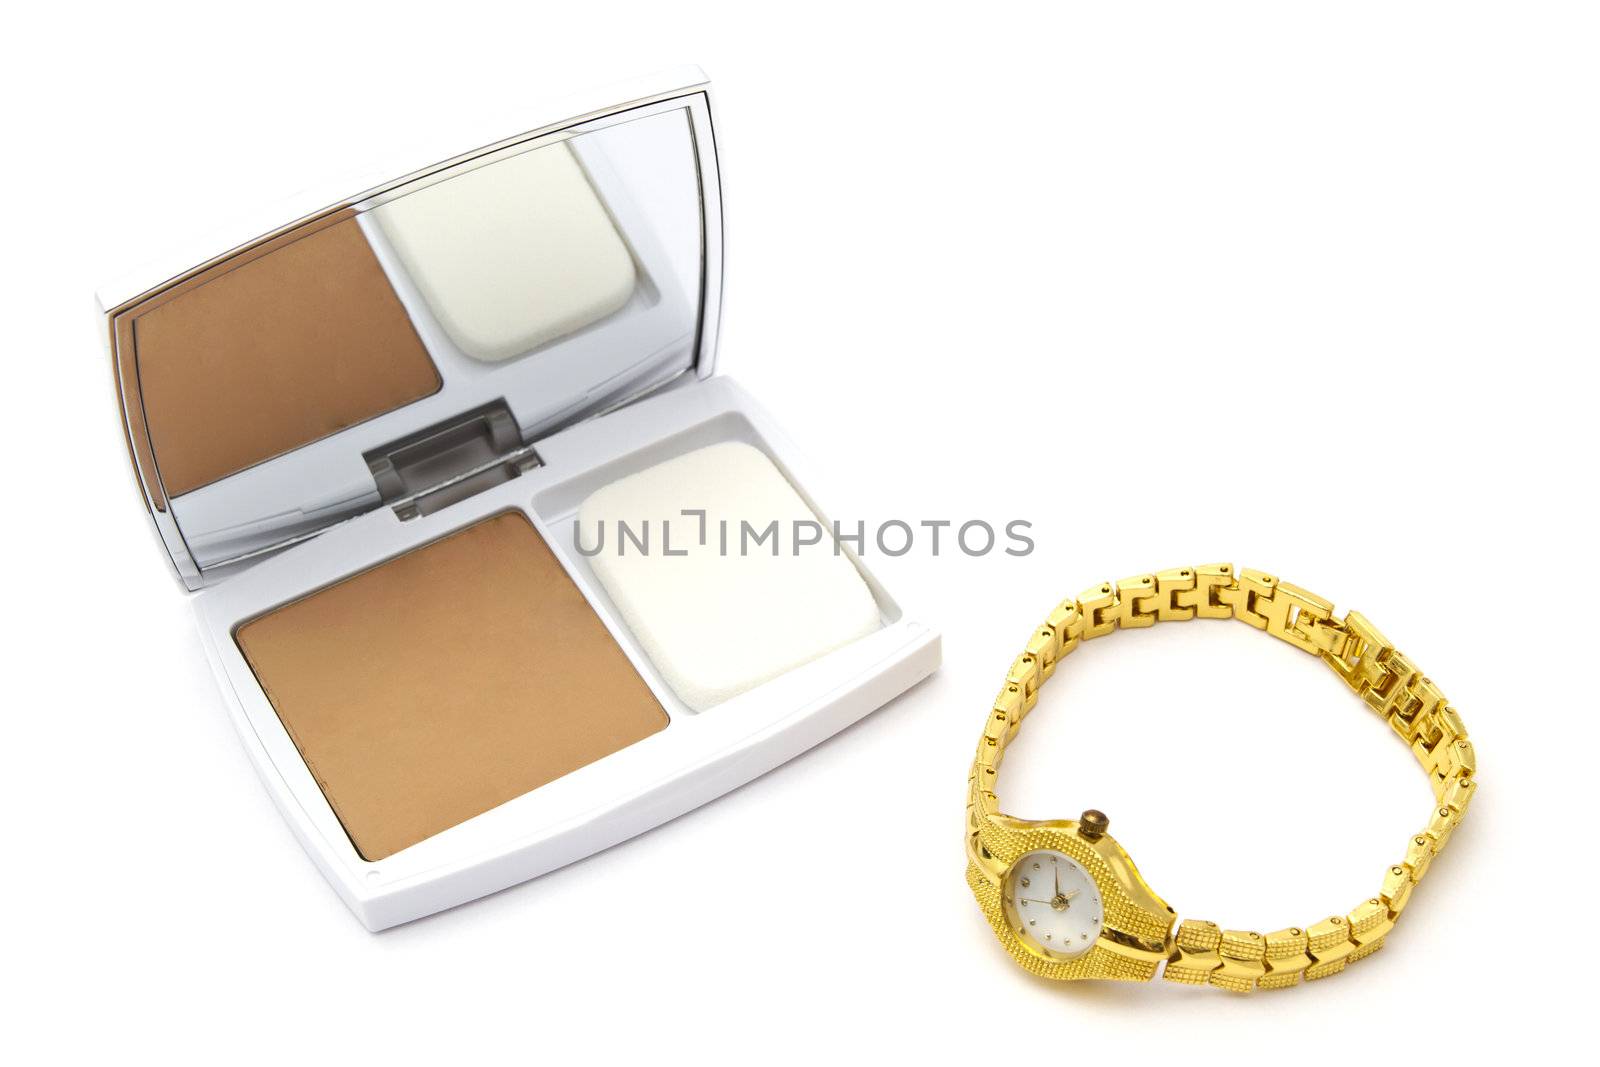 Powder compact and watch by ibphoto